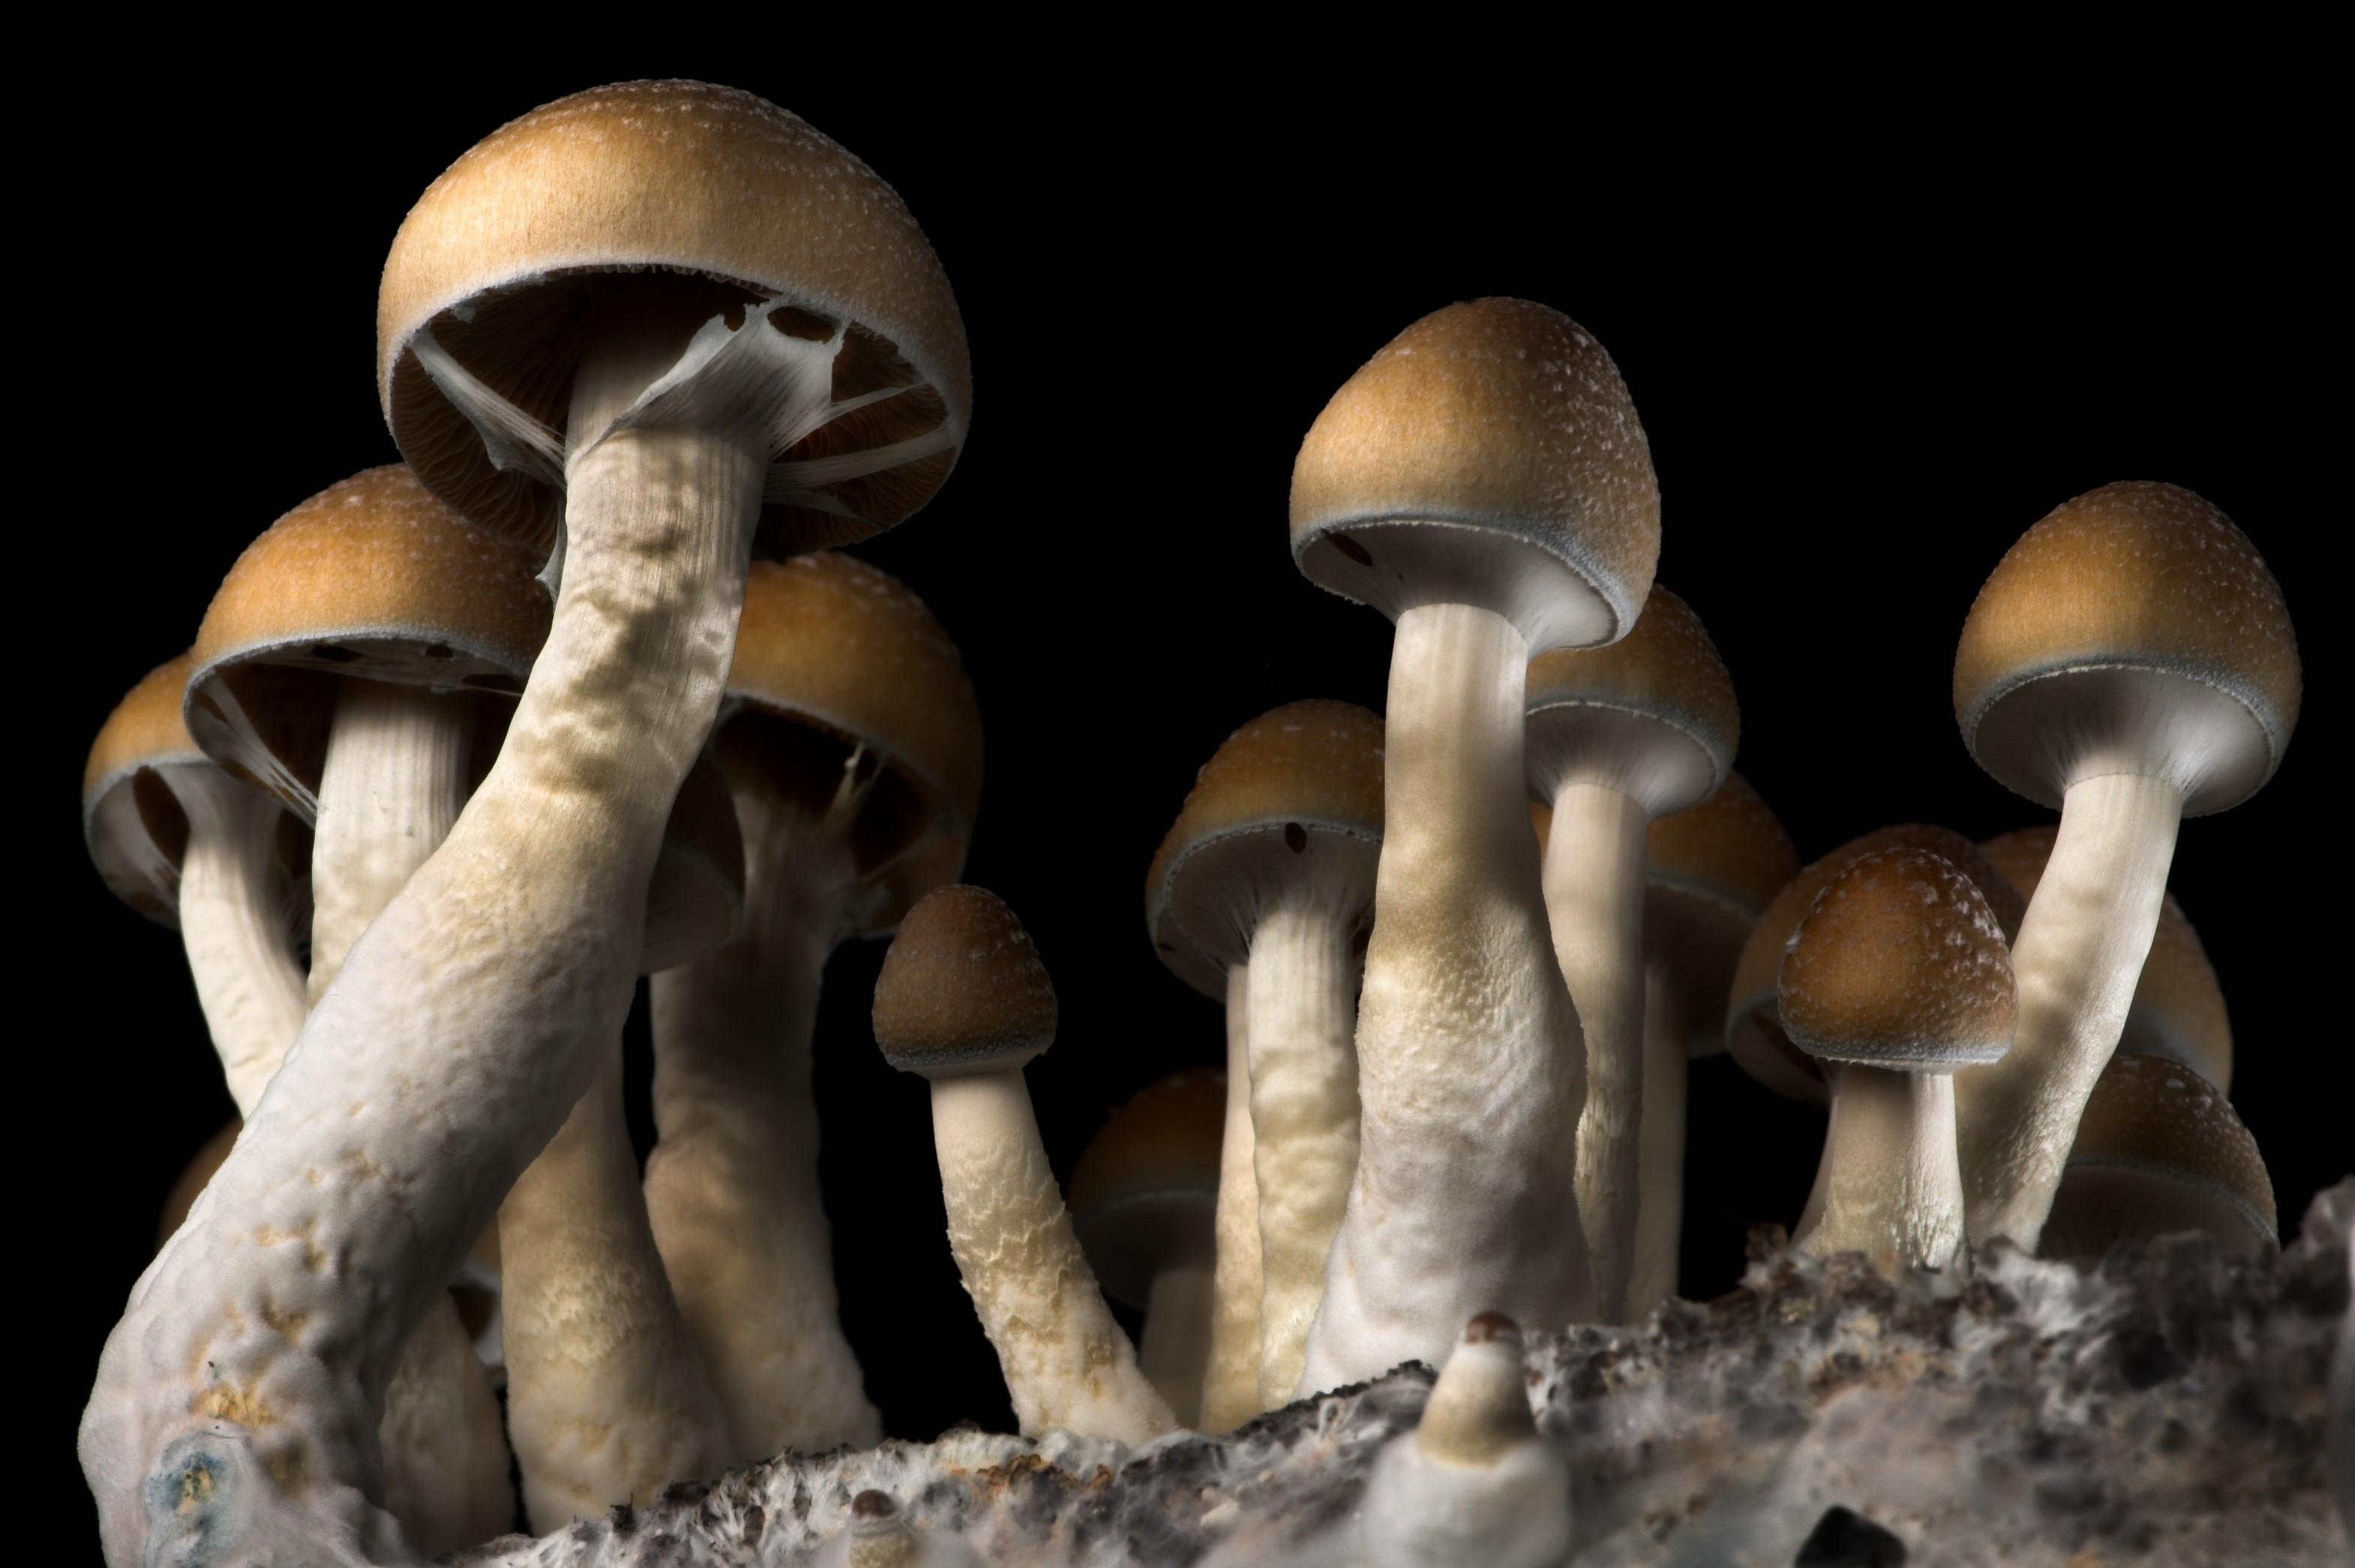 Home cultivation of mushrooms